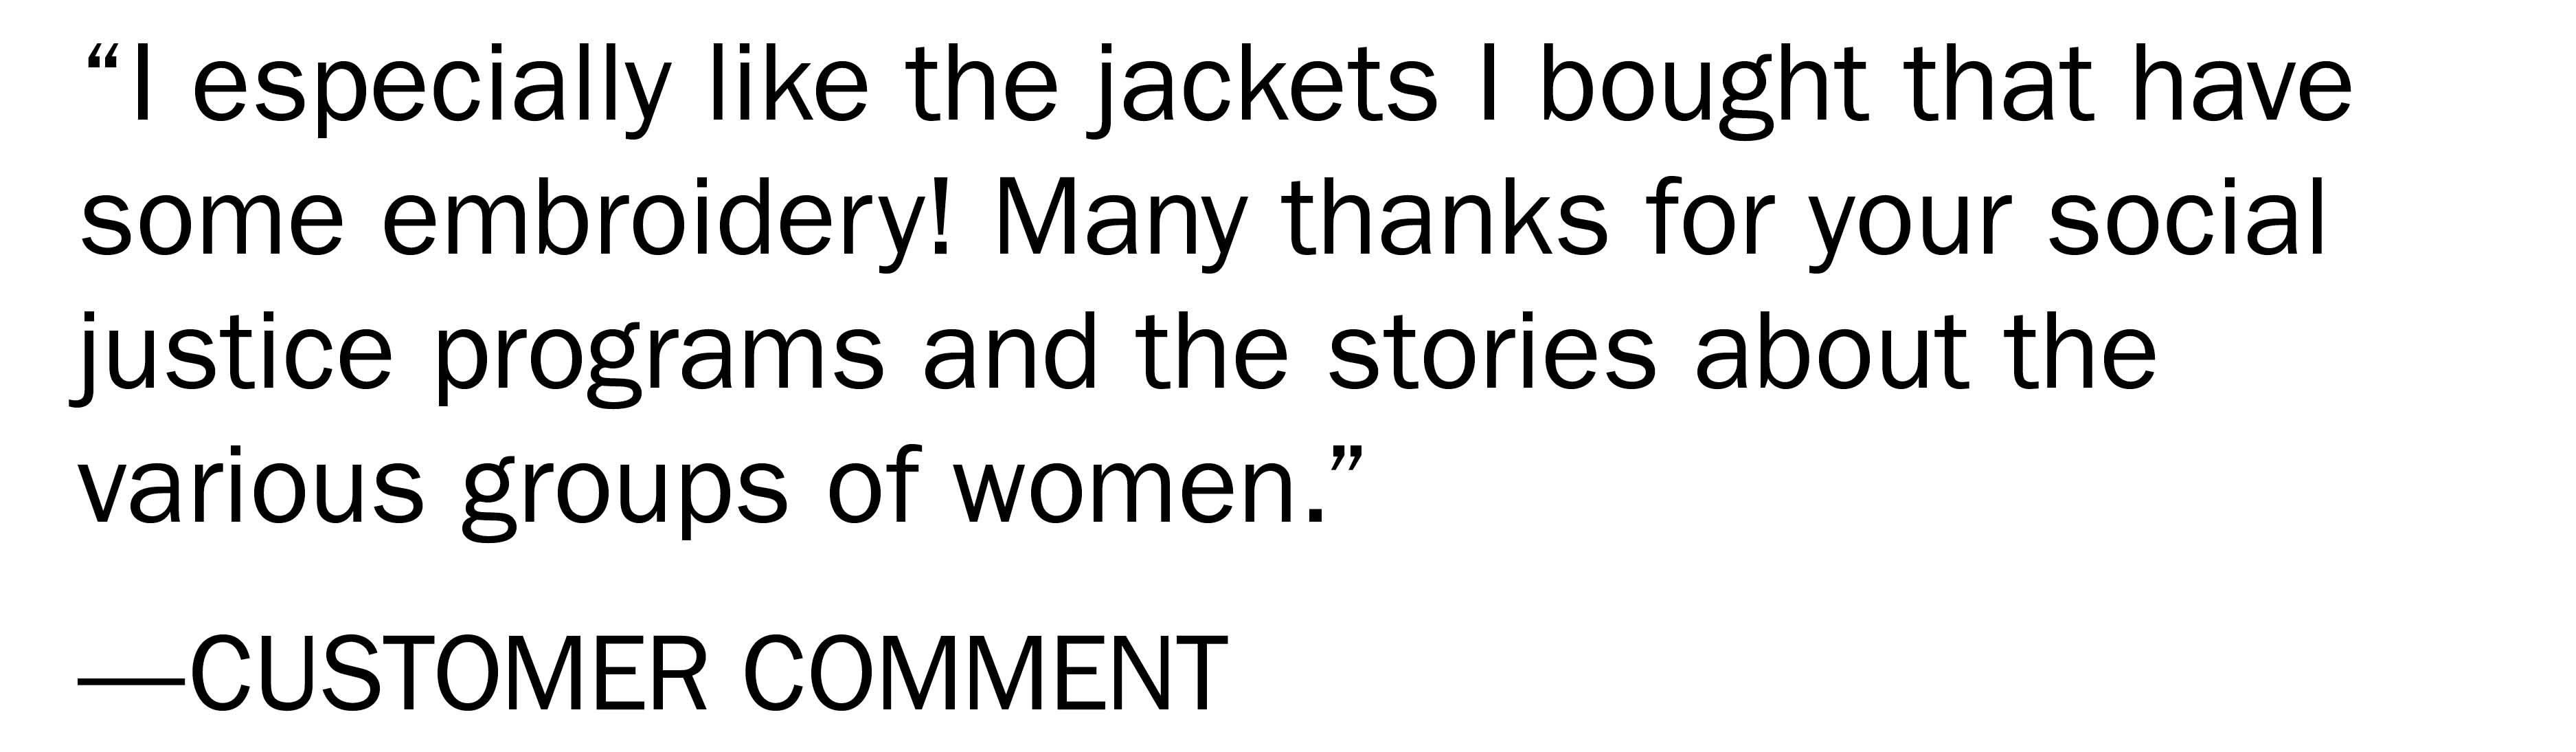 "I especially like the jackets I bought that have some embroidery! Many thanks for your social justice programs and the stories about the various groups of women." -CUSTOMER COMMENT